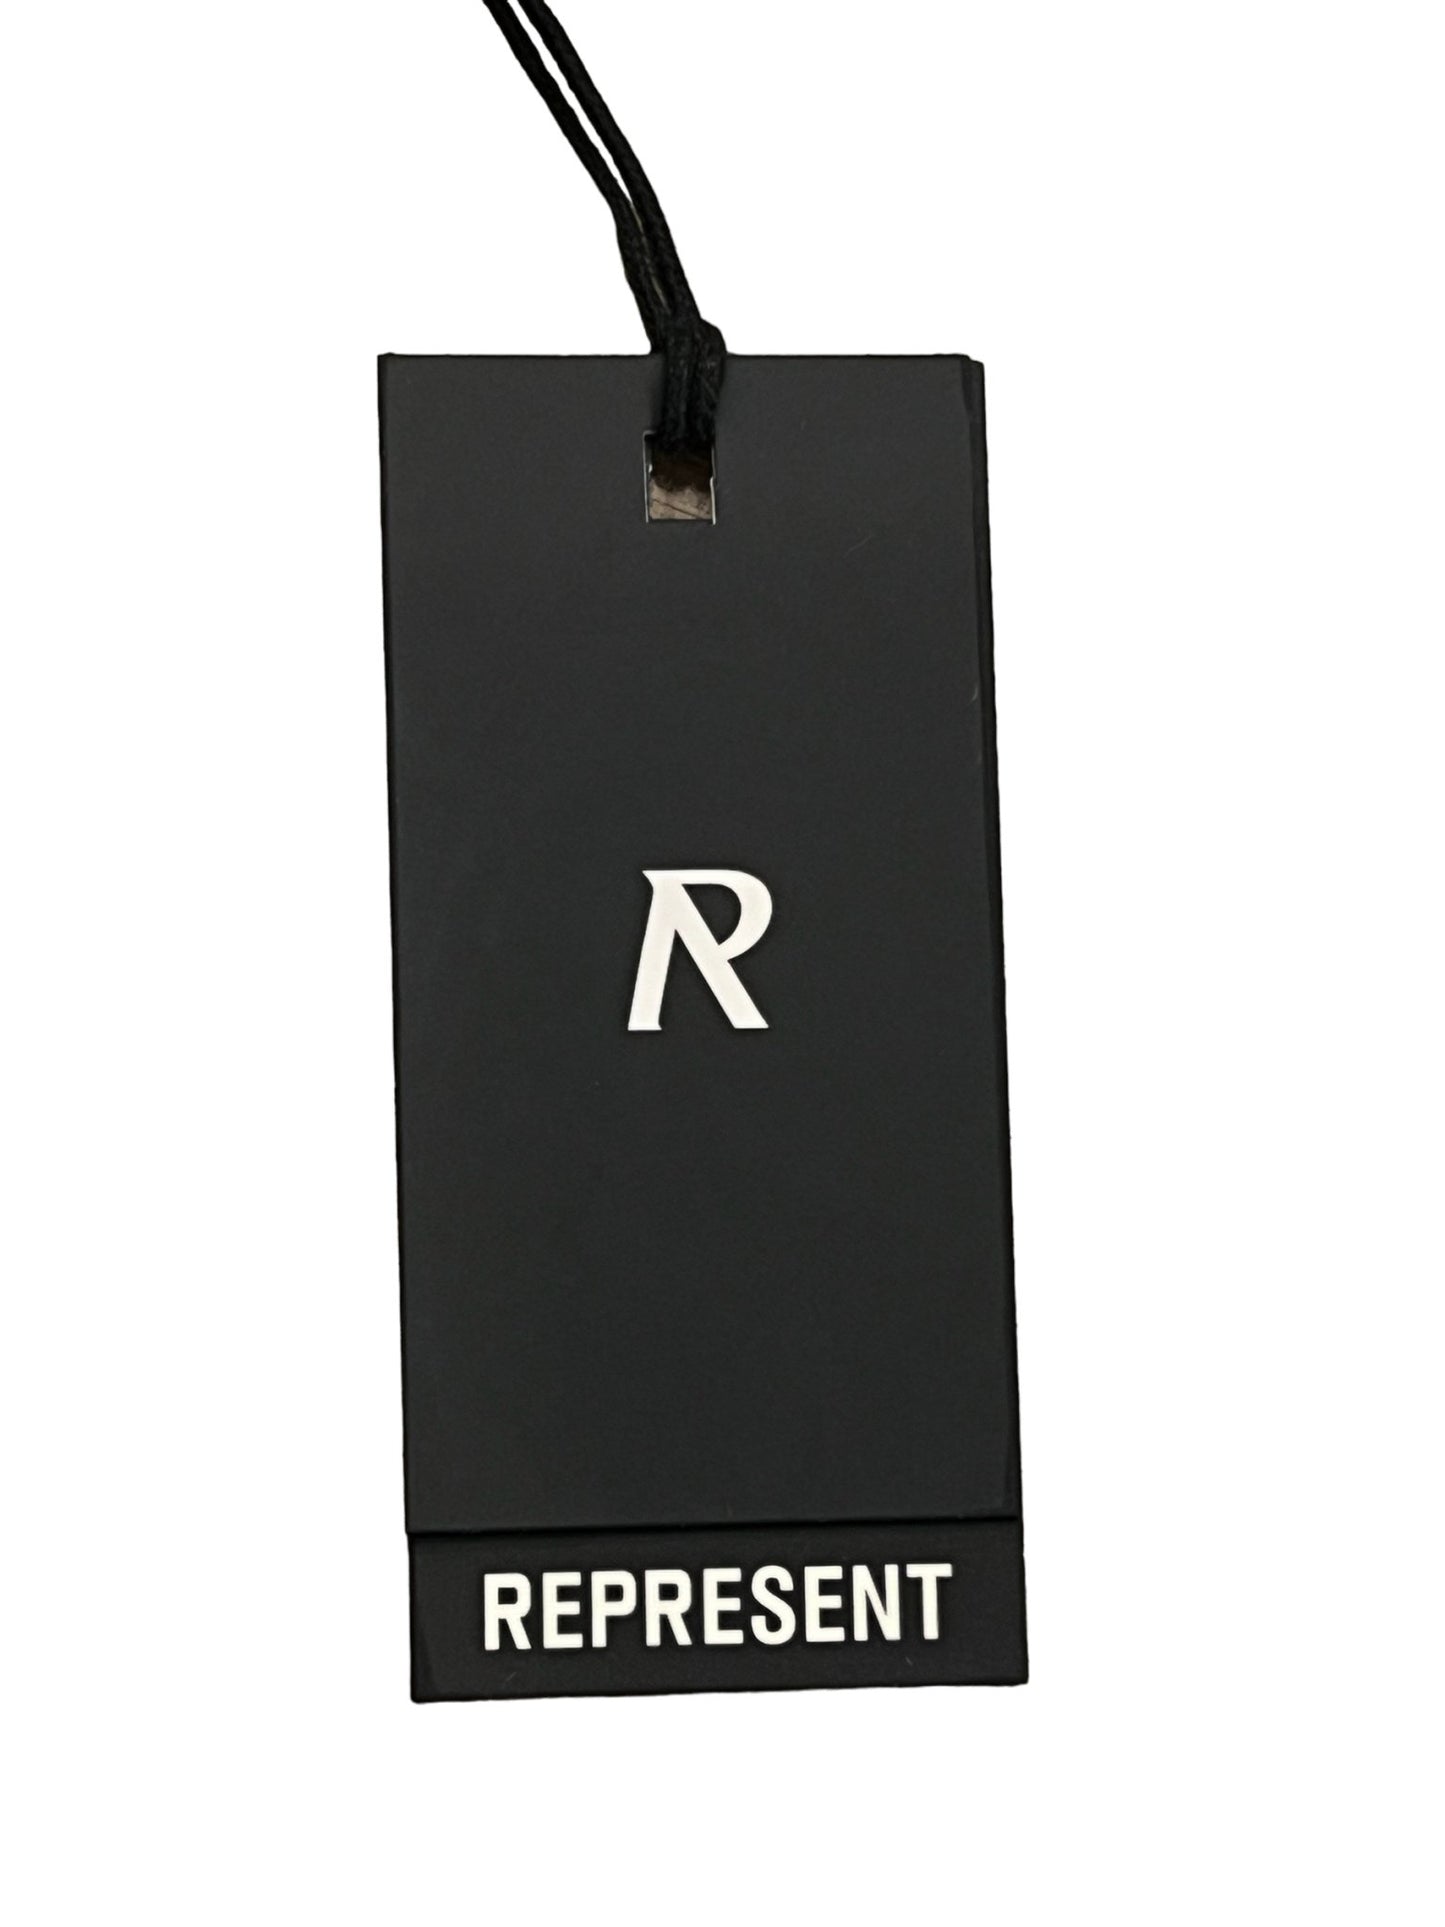 Black rectangular clothing tag with a white "R" in the center and the word "REPRESENT" at the bottom, attached to an oversized fit luxury cotton t-shirt from the REPRESENT MLM410-72 SPIRITS OF SUMMER T-SHIRT WHI collection by REPRESENT.